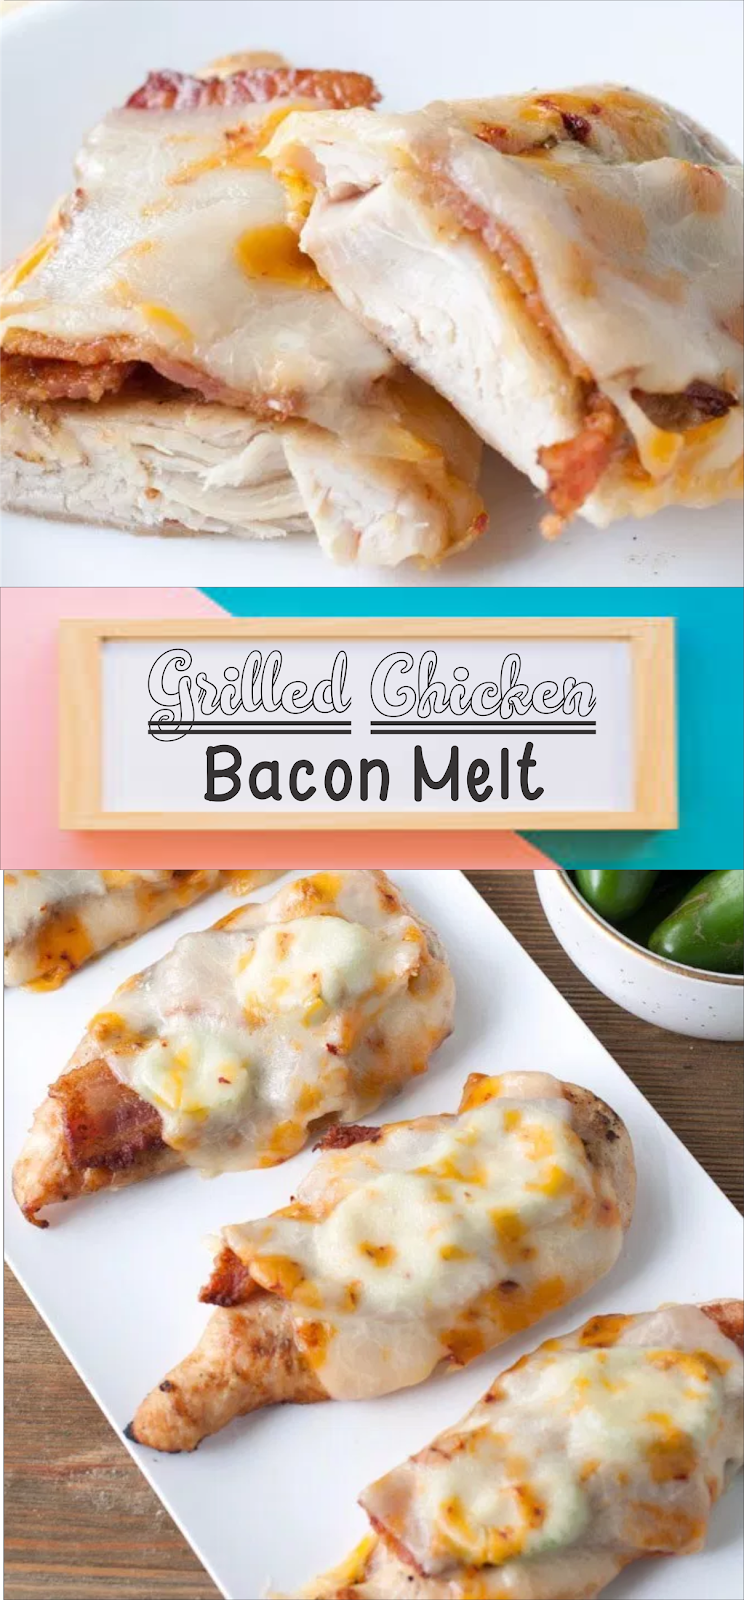 Grilled Chicken Bacon Melt | Floats CO